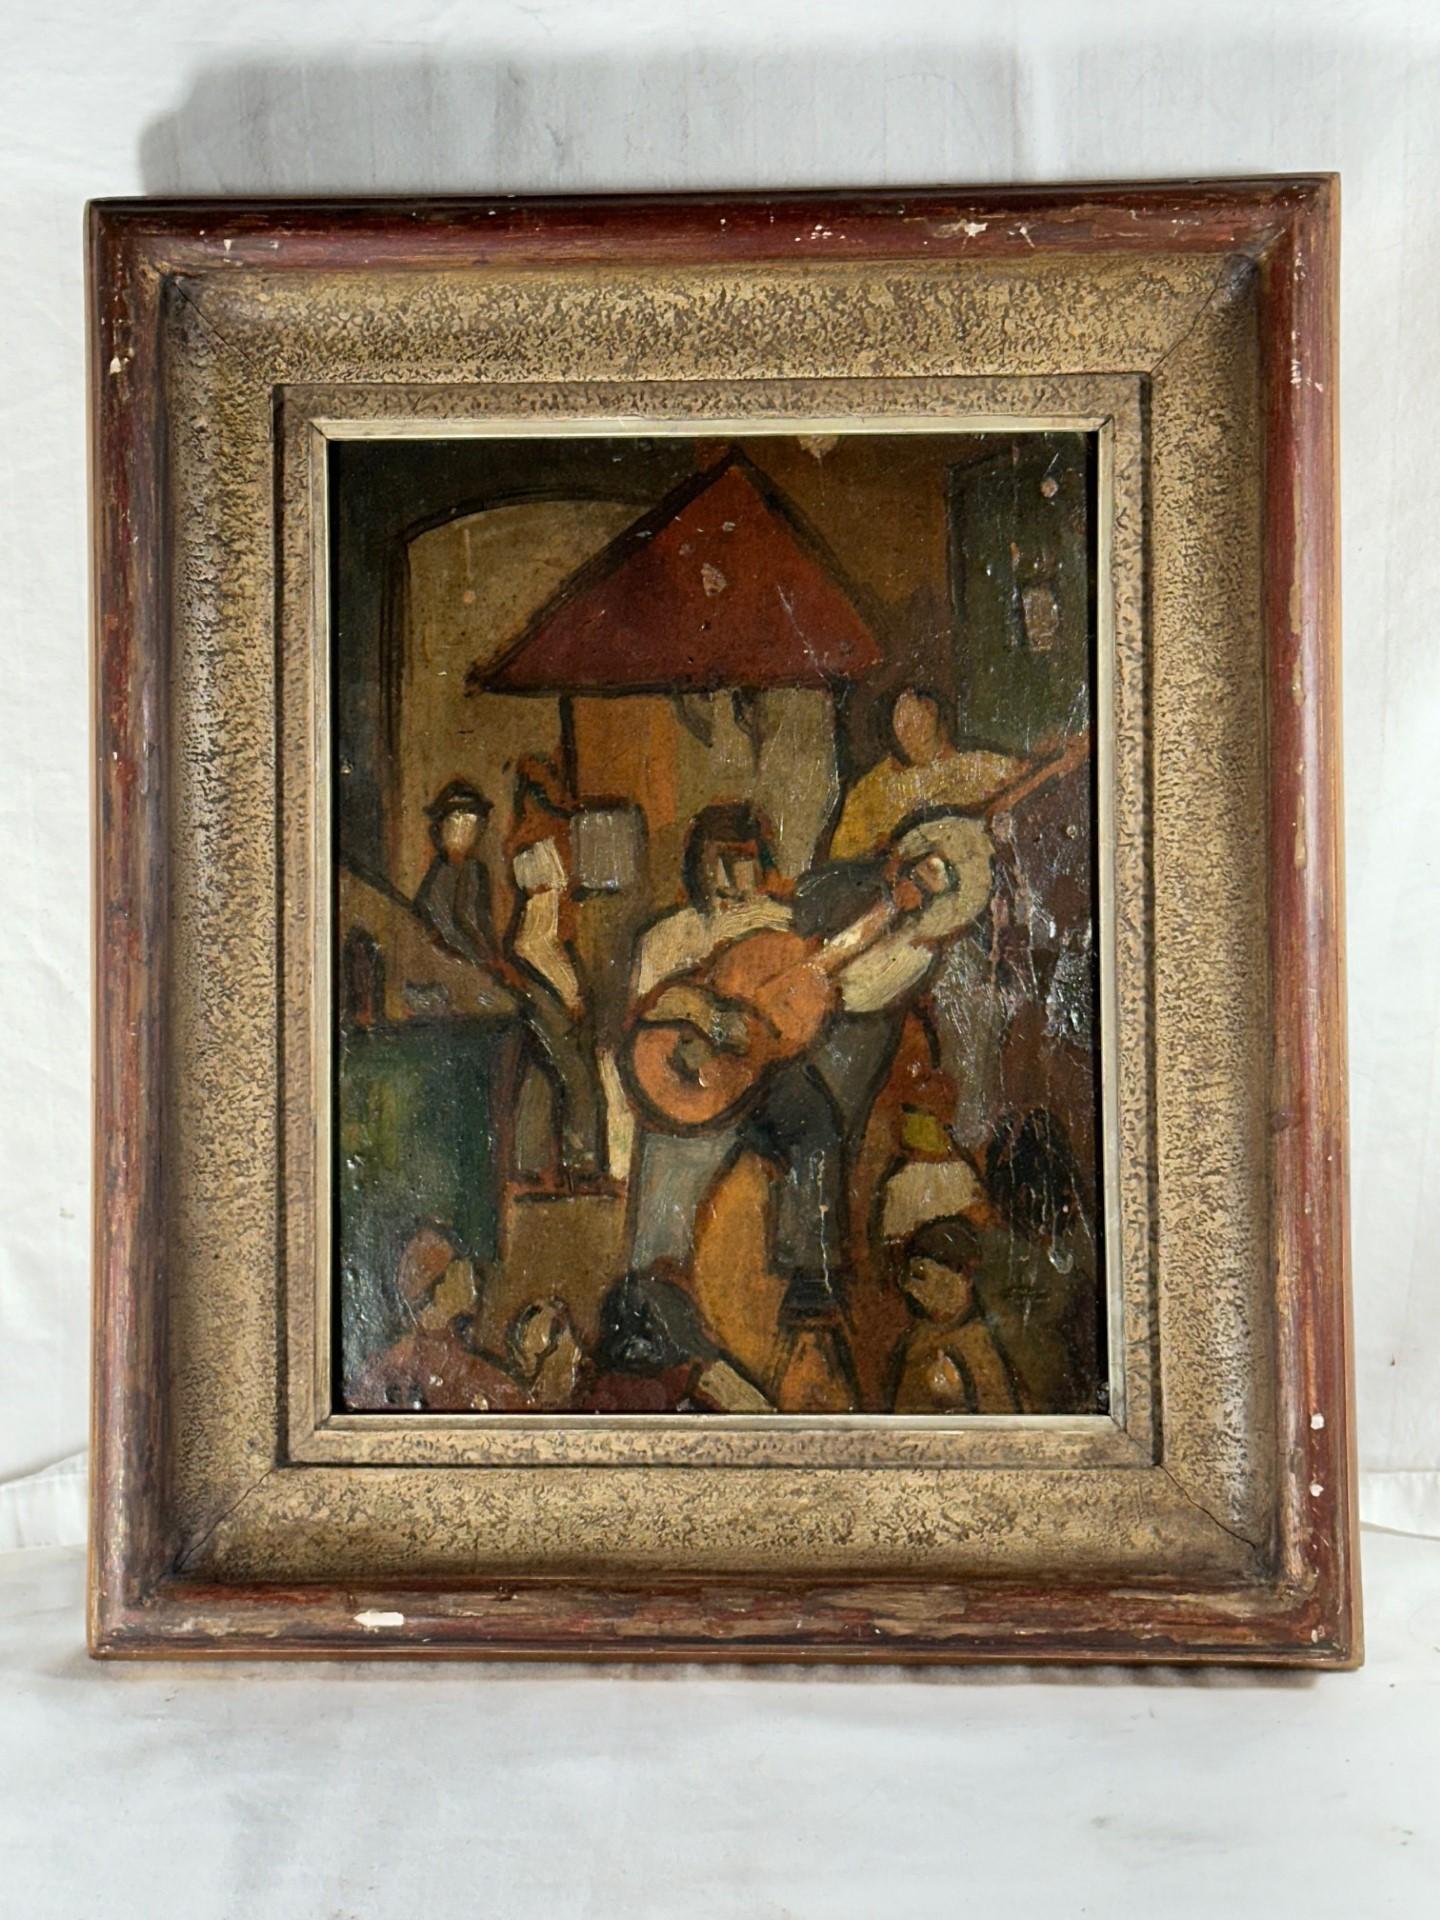 Wood George Rouault Studio Fauvism Oil Painting on Paper on Board. For Sale